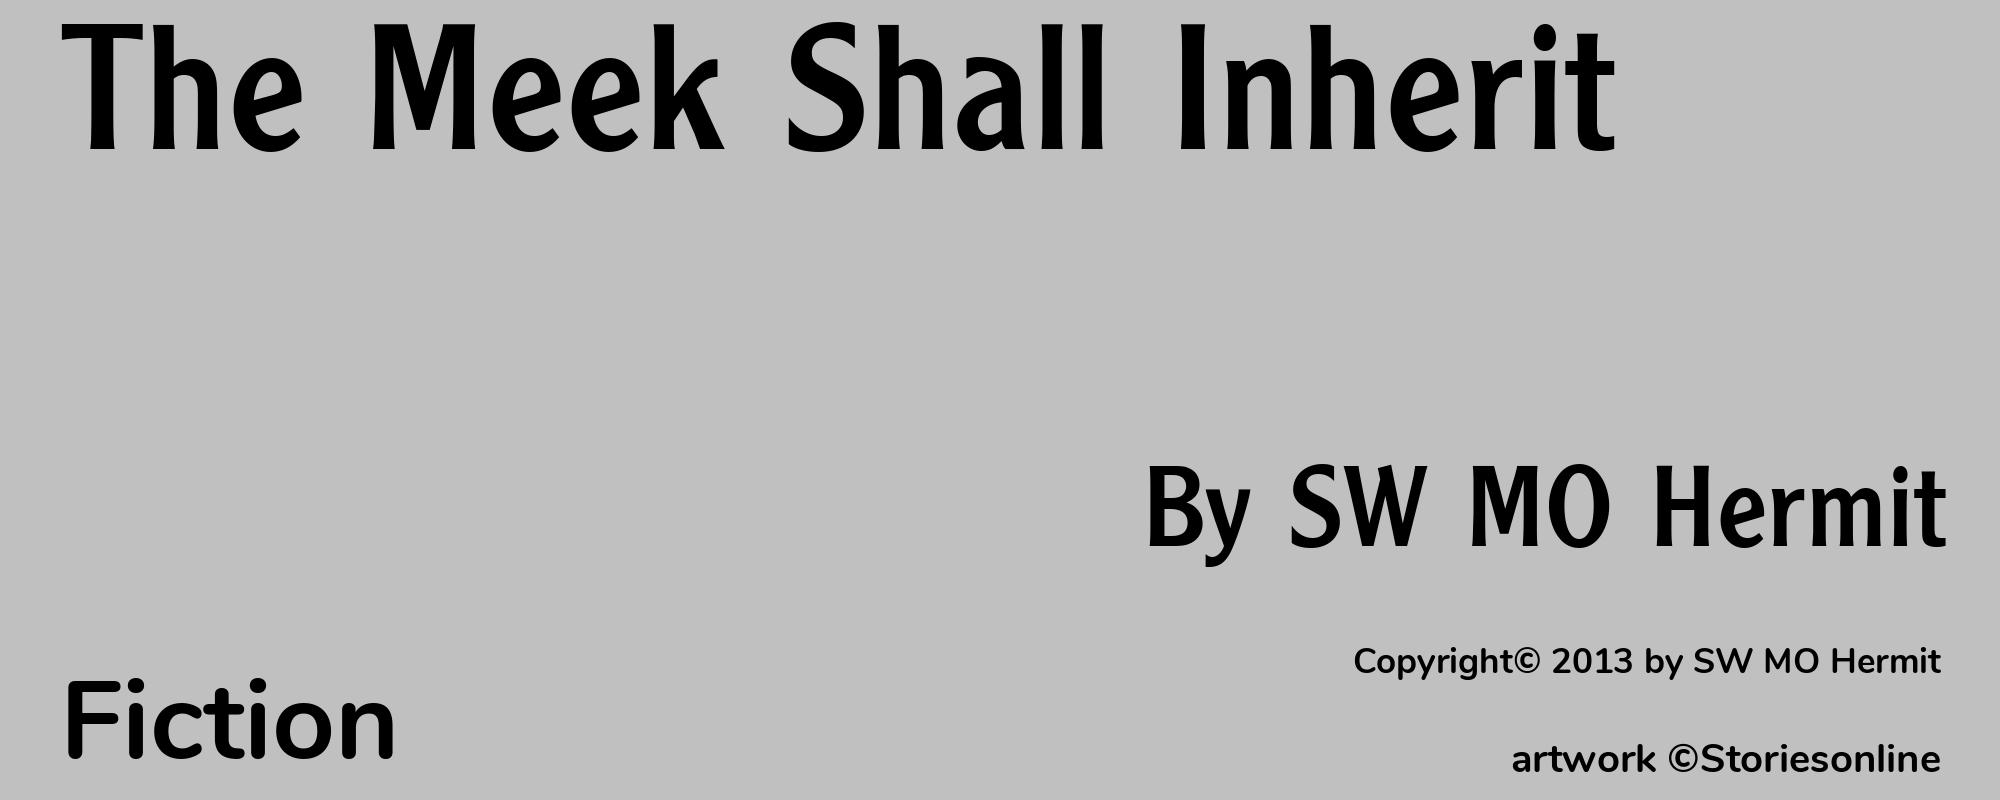 The Meek Shall Inherit - Cover